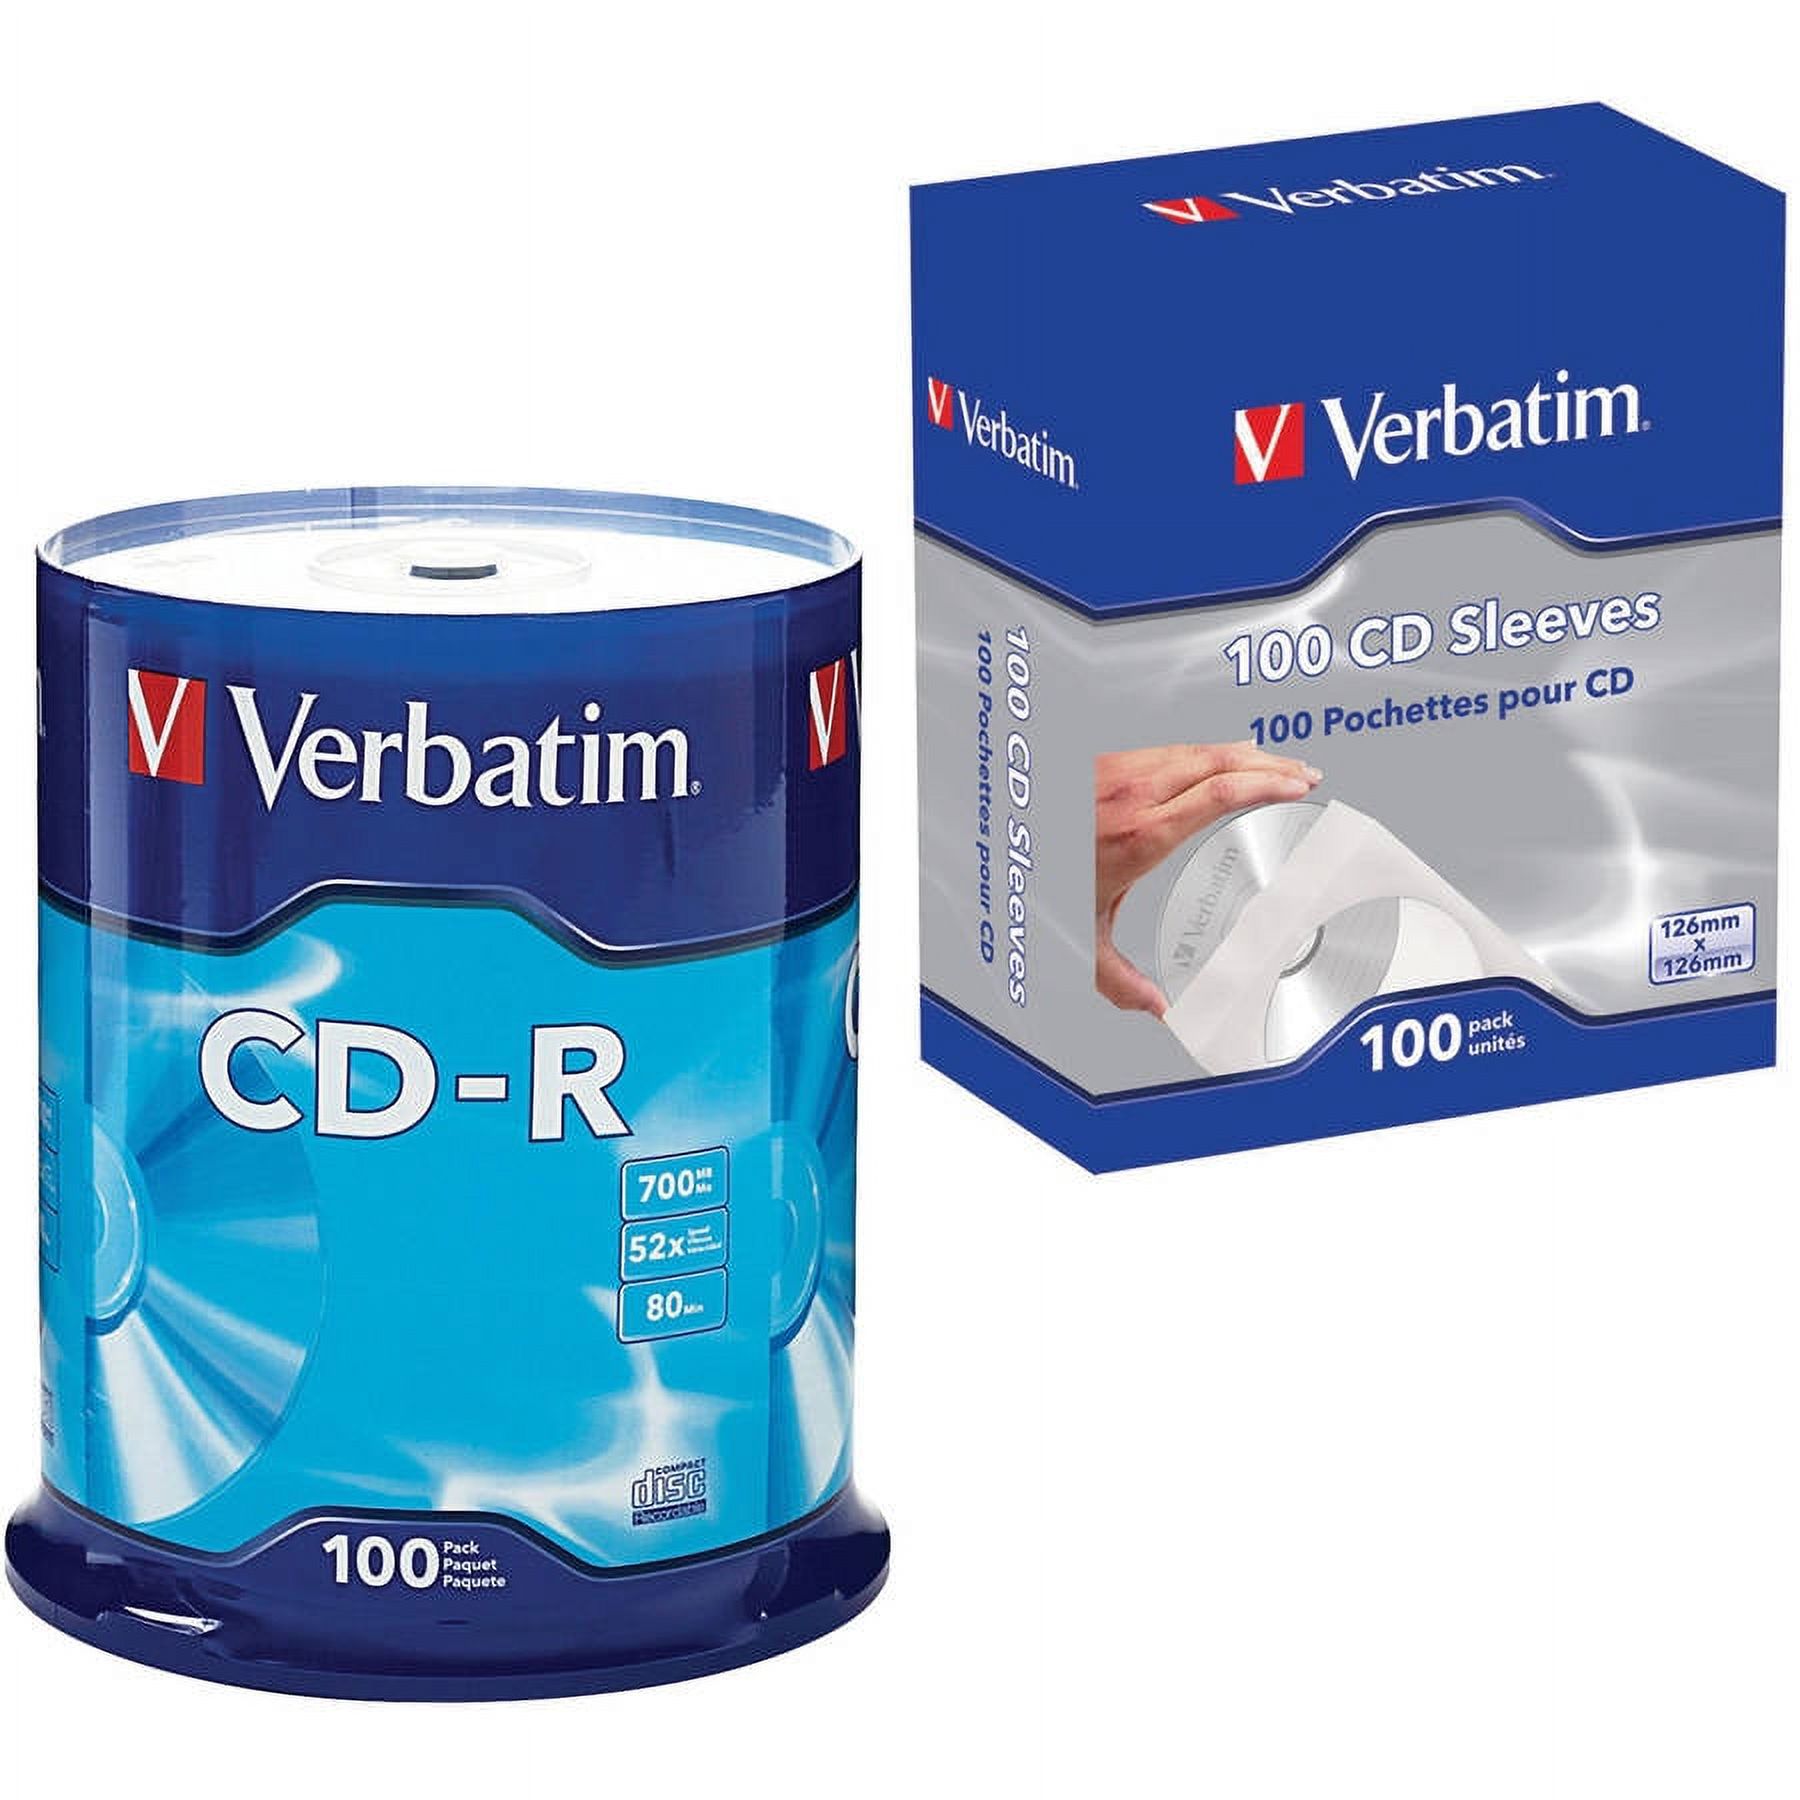 Verbatim 94554 700MB 80-Minute 52x CD-RS 100-Count Spindle and CD/DVD Paper Sleeves with Clear Window, 100-Pack - image 1 of 4